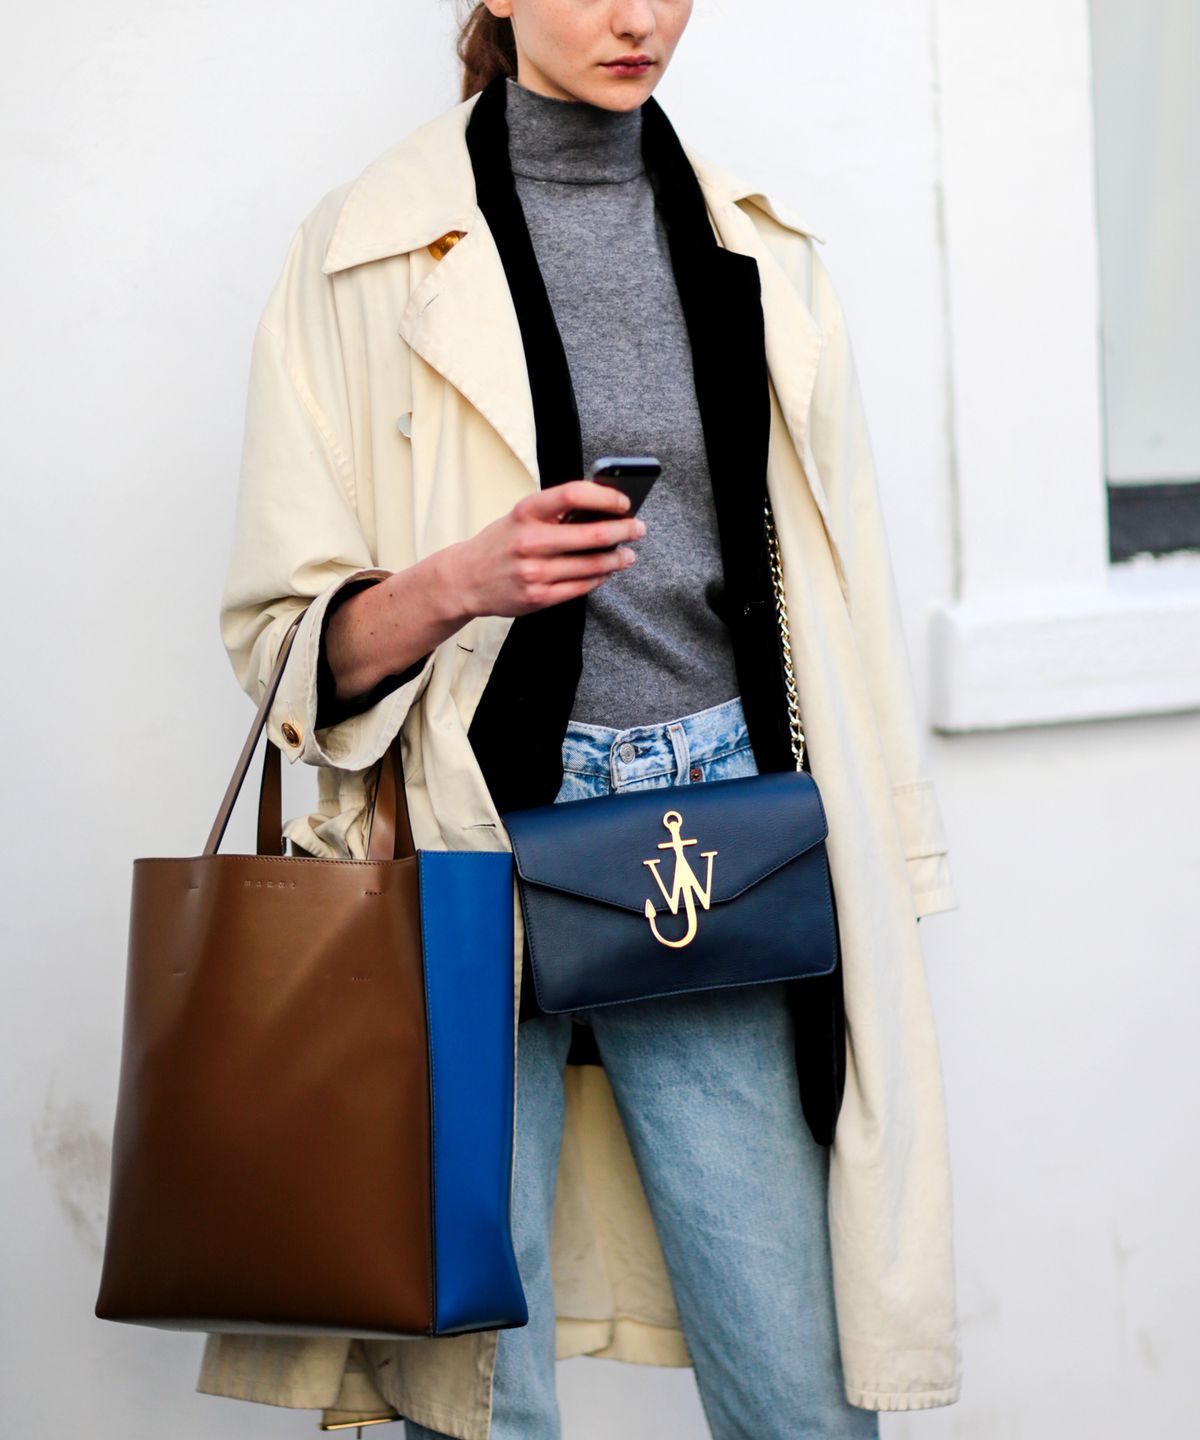 Team your blazer and trench together